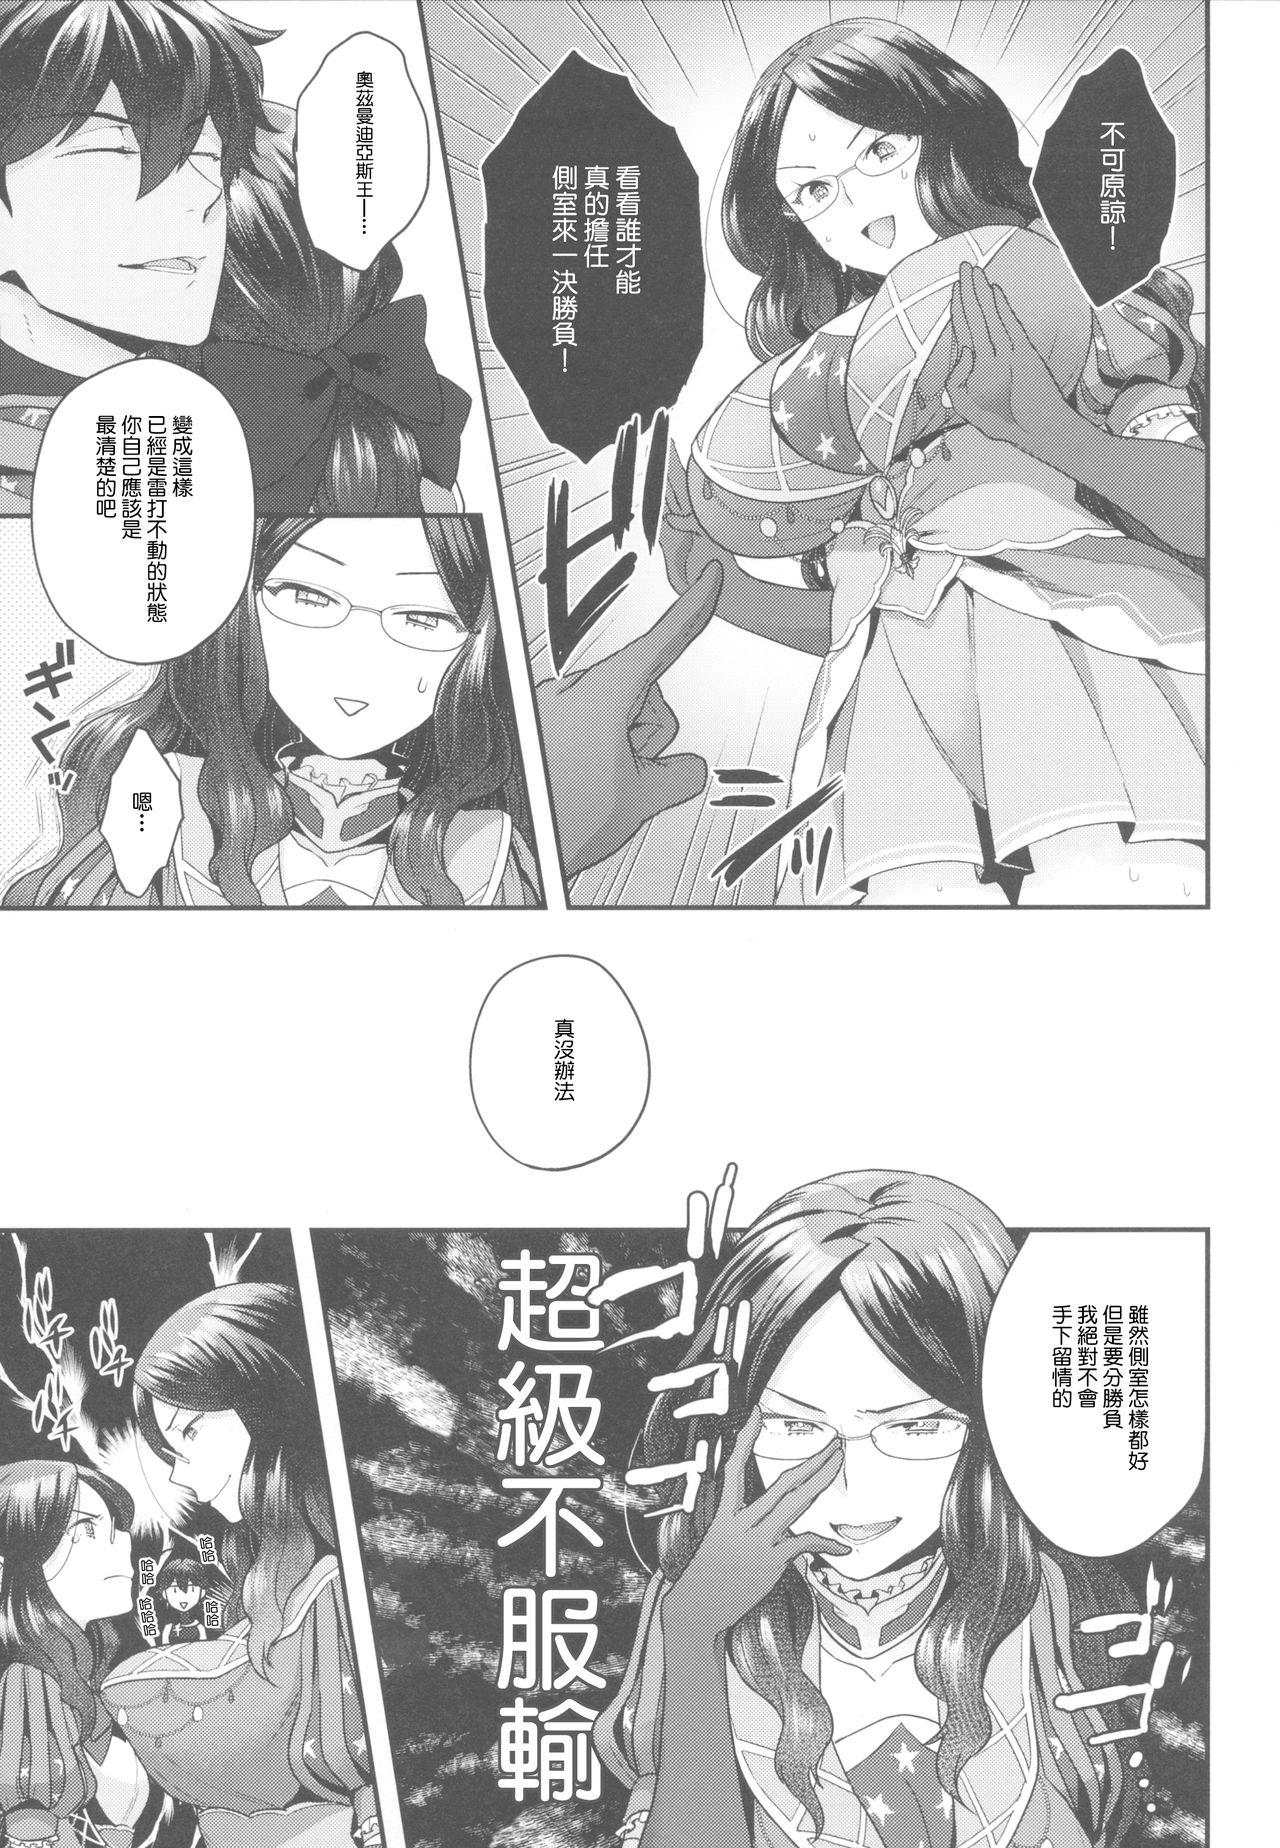 Eating Pussy OJY1DVI2 - Fate grand order Freak - Page 6